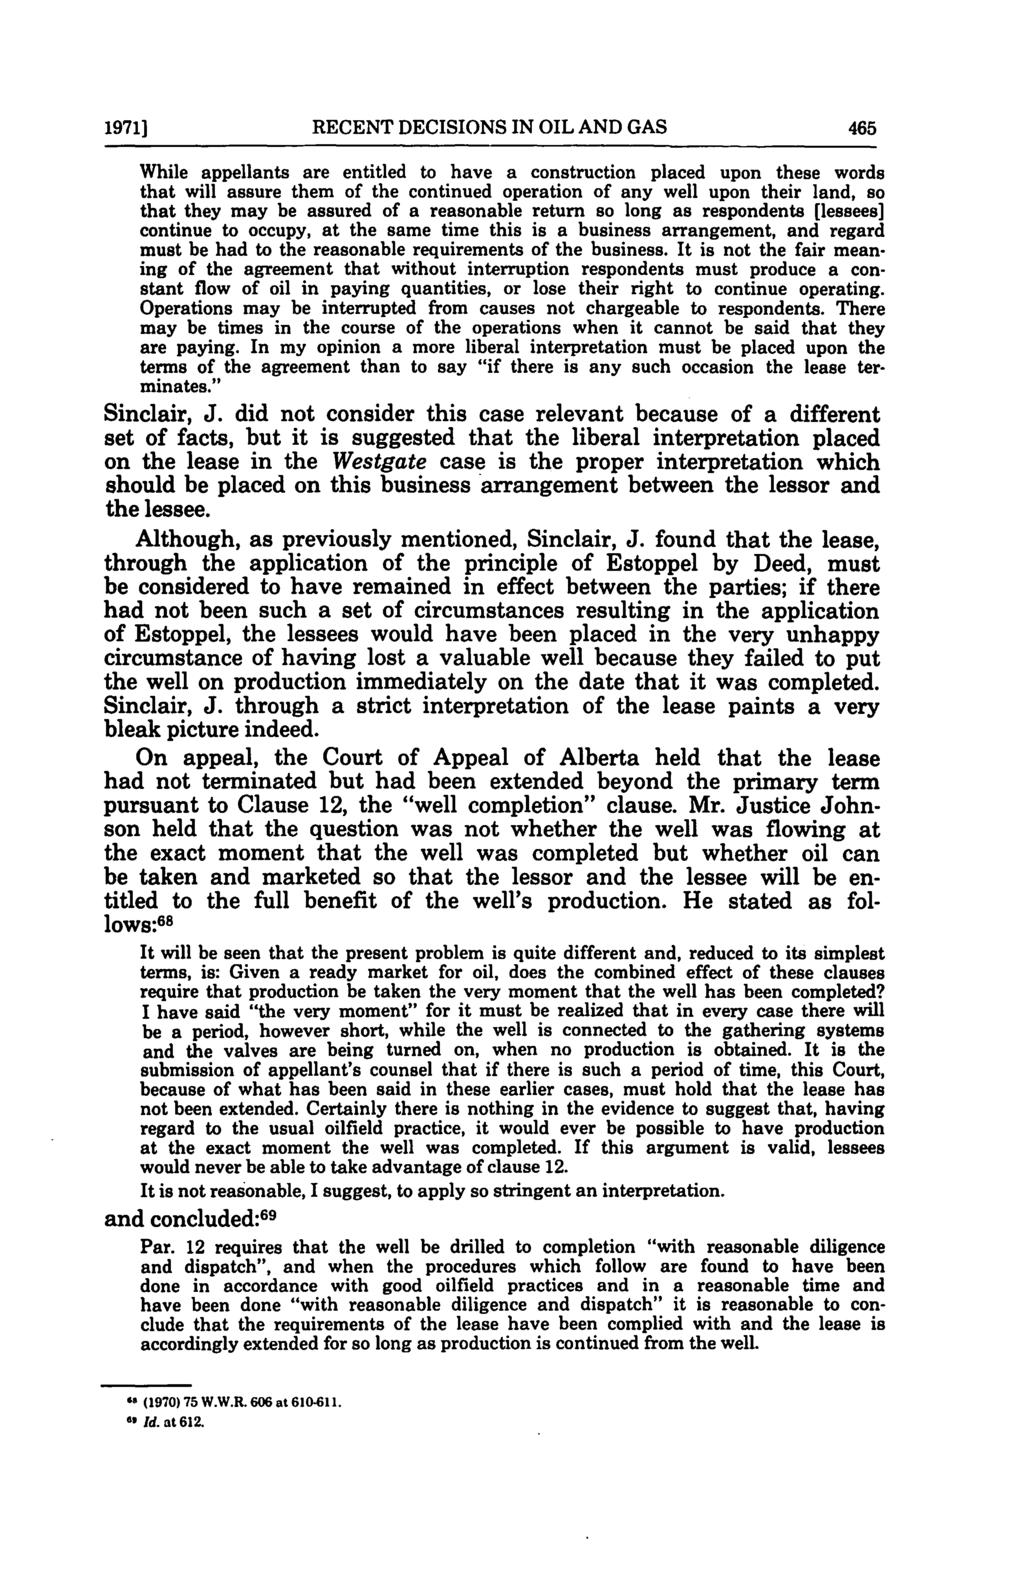 1971) RECENT DECISIONS IN OIL AND GAS 465 While appellants are entitled to have a construction placed upon these words that will assure them of the continued operation of any well upon their land, so